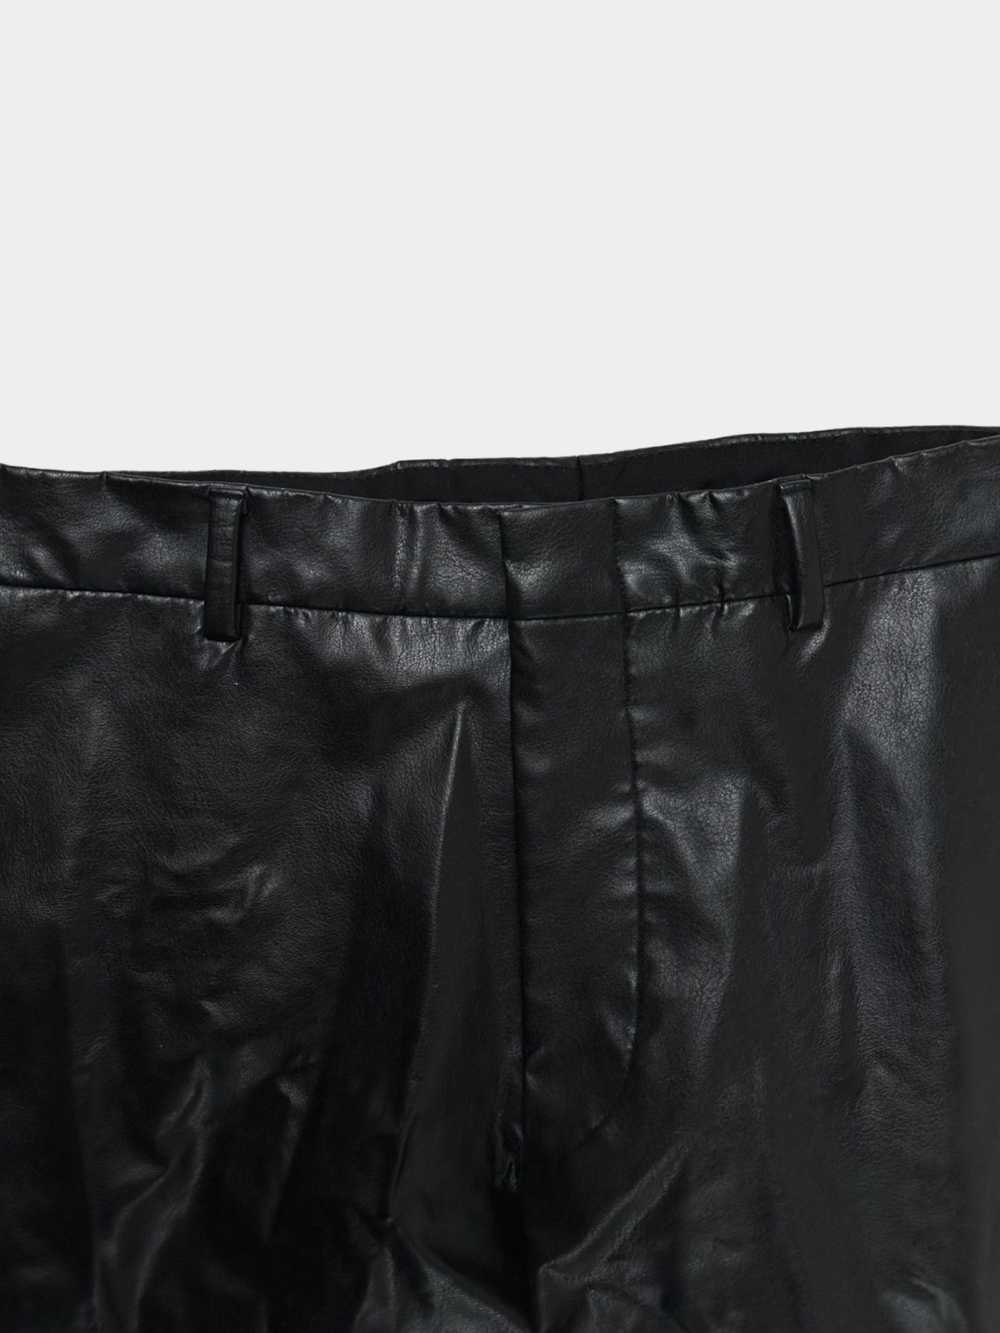 Dior AW2003 'Luster' PVC Runway Trousers - image 3